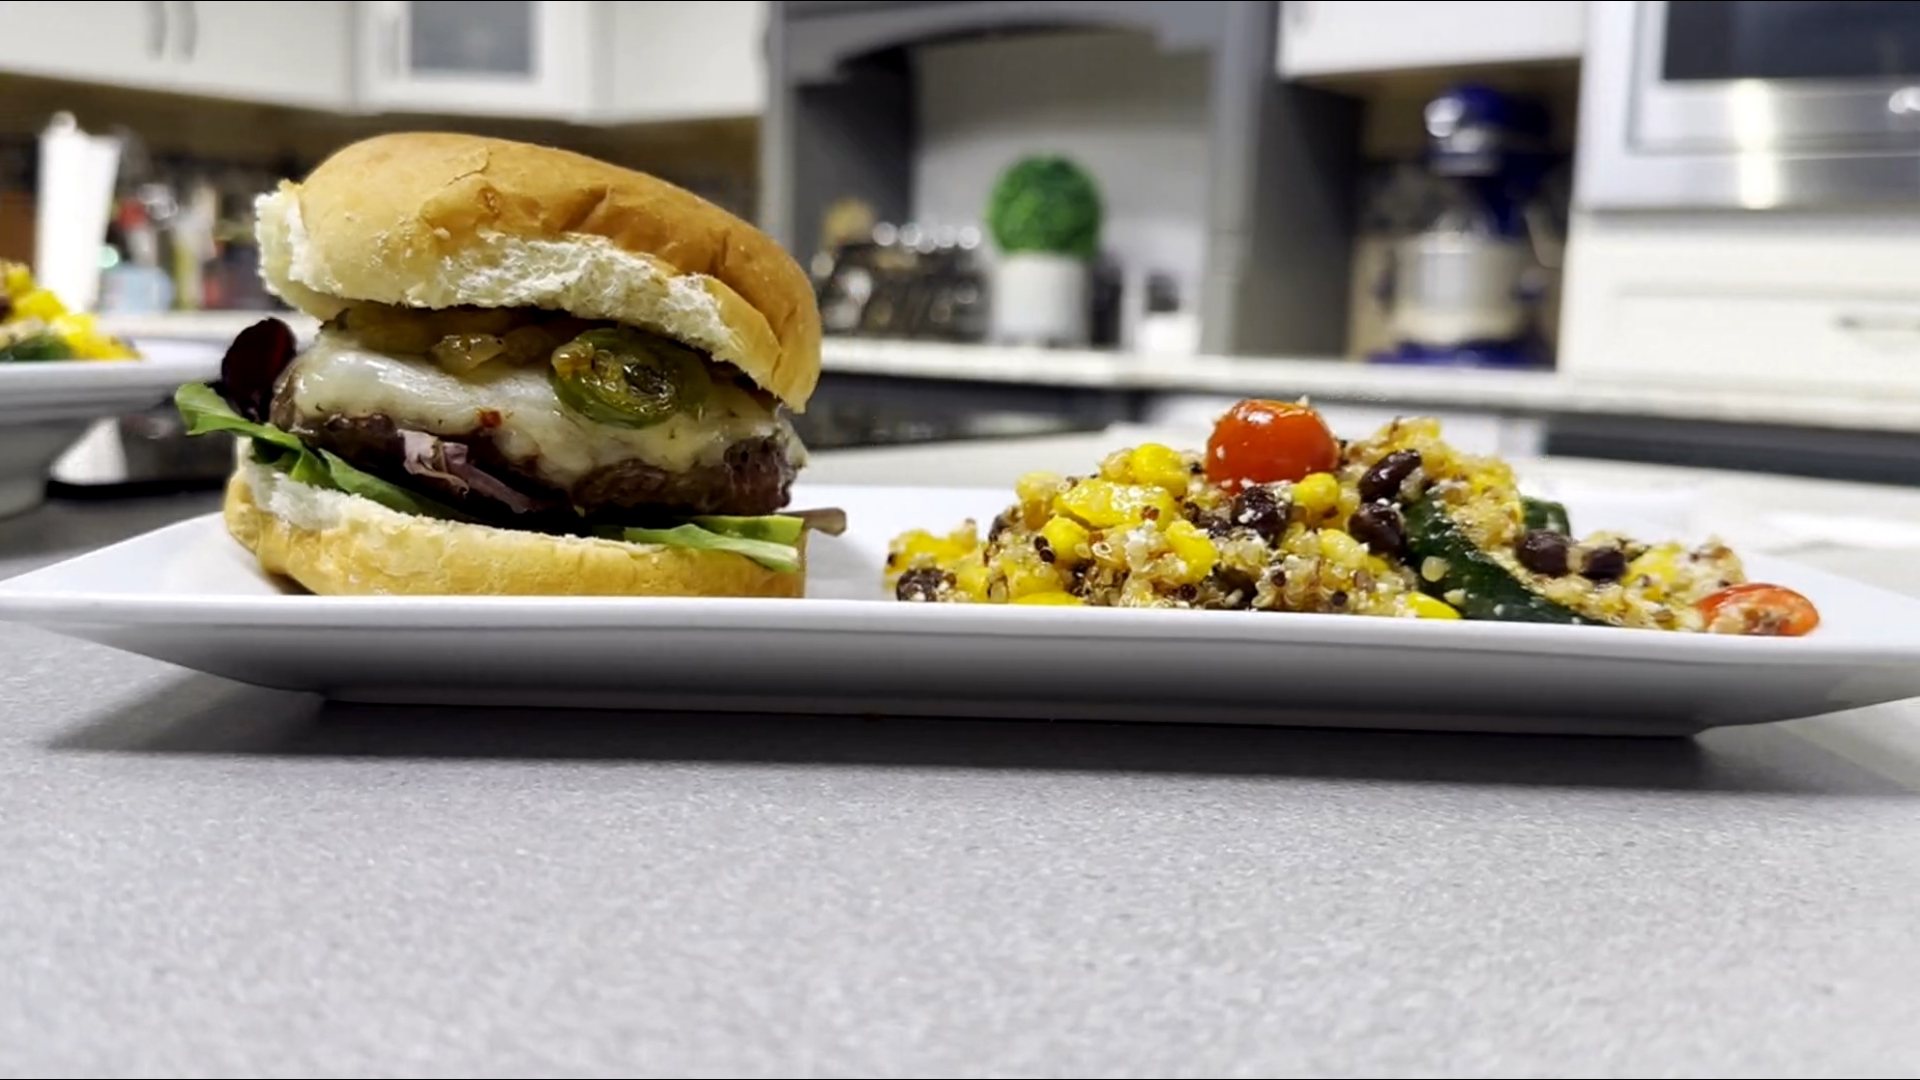 Burgers and a quinoa salad get a southwest spin and plenty of summertime favorite veggies, of course! It's a unique and tasty twist for your BBQ plans!